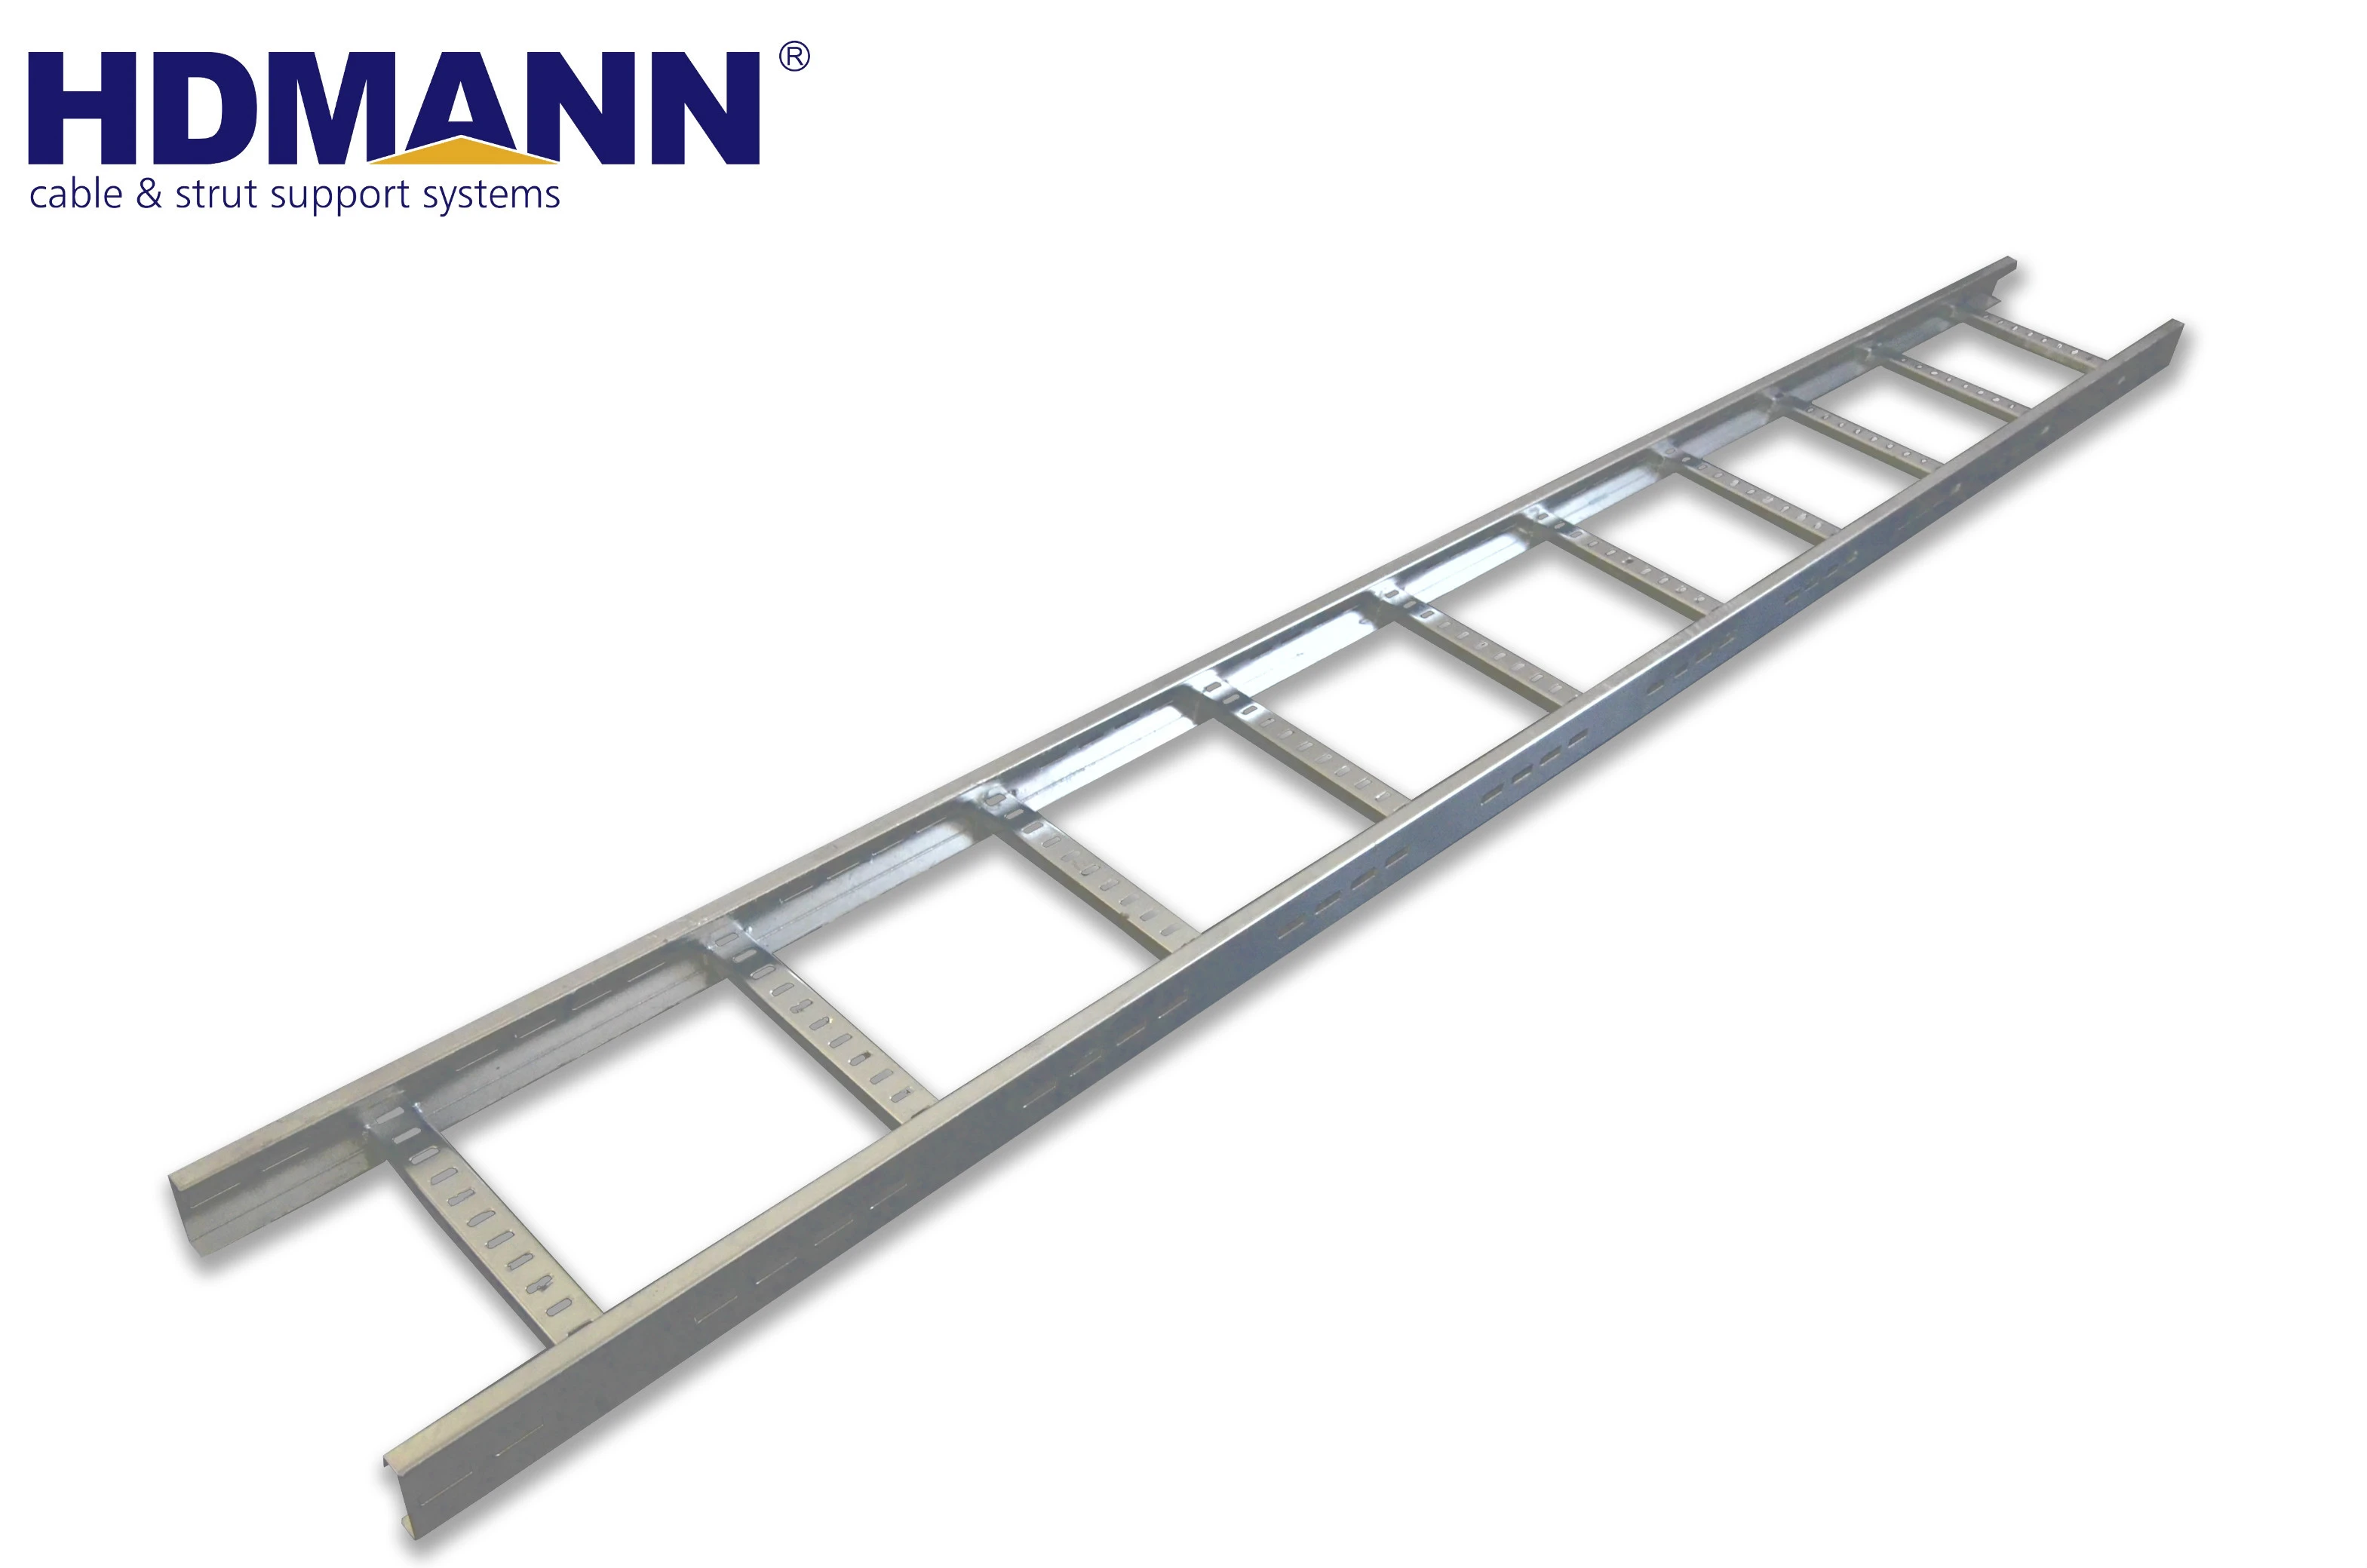 HDMANN Heavy Duty HDG Nema 20b Cable Ladder Ladder Type Cable Tray